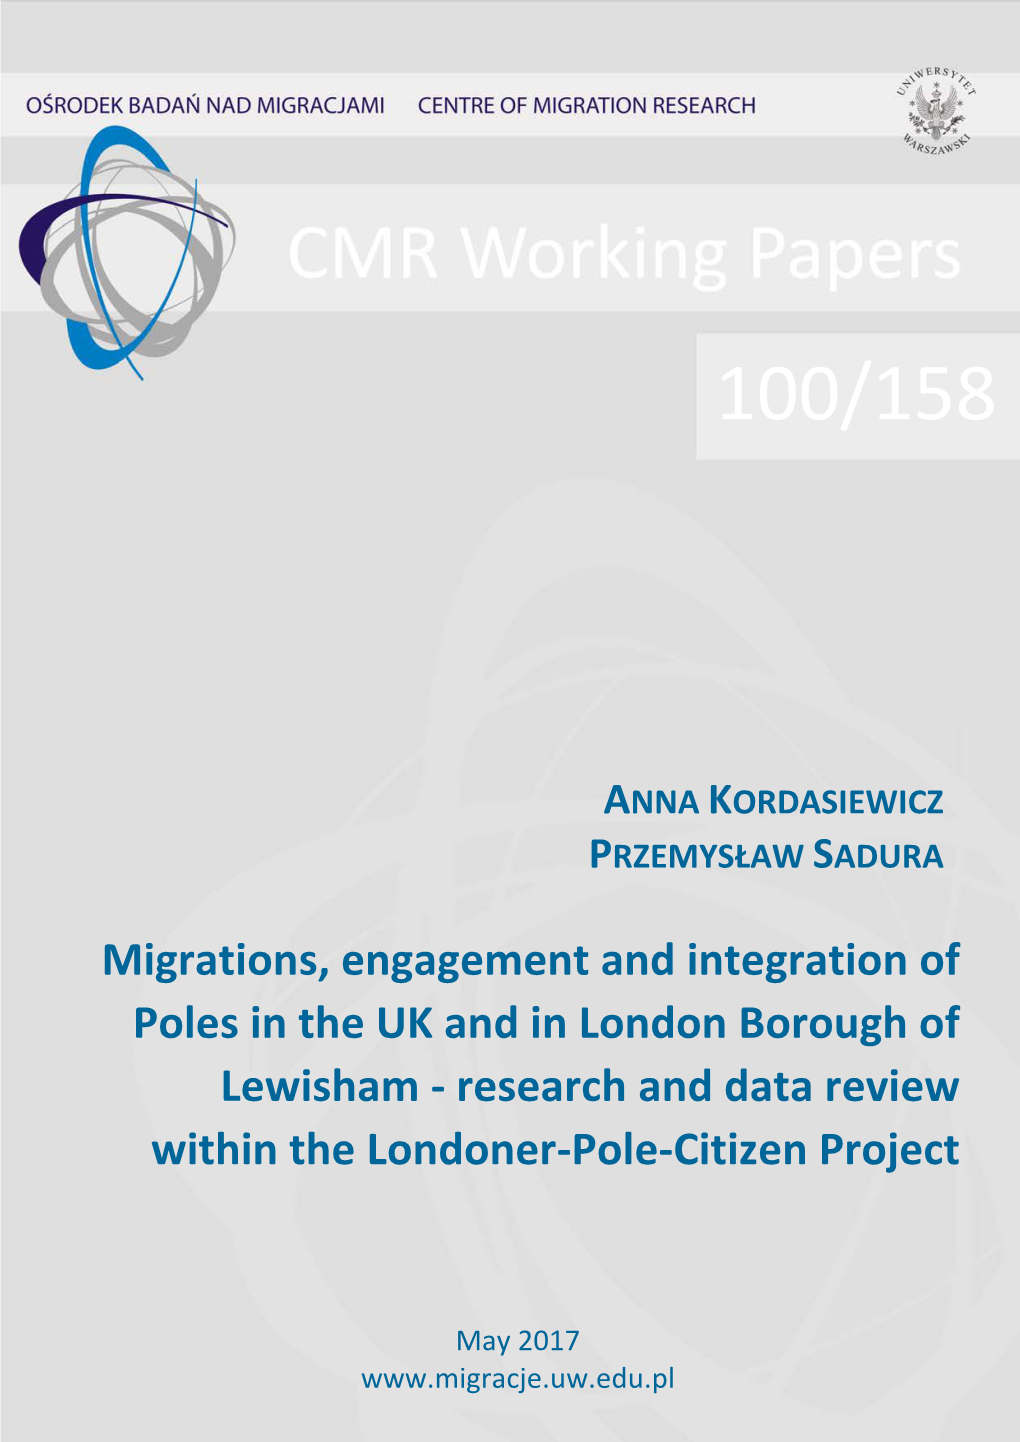 Migrations, Engagement and Integration of Poles in the UK and in London Borough of Lewisham - Research and Data Review Within the Londoner-Pole-Citizen Project